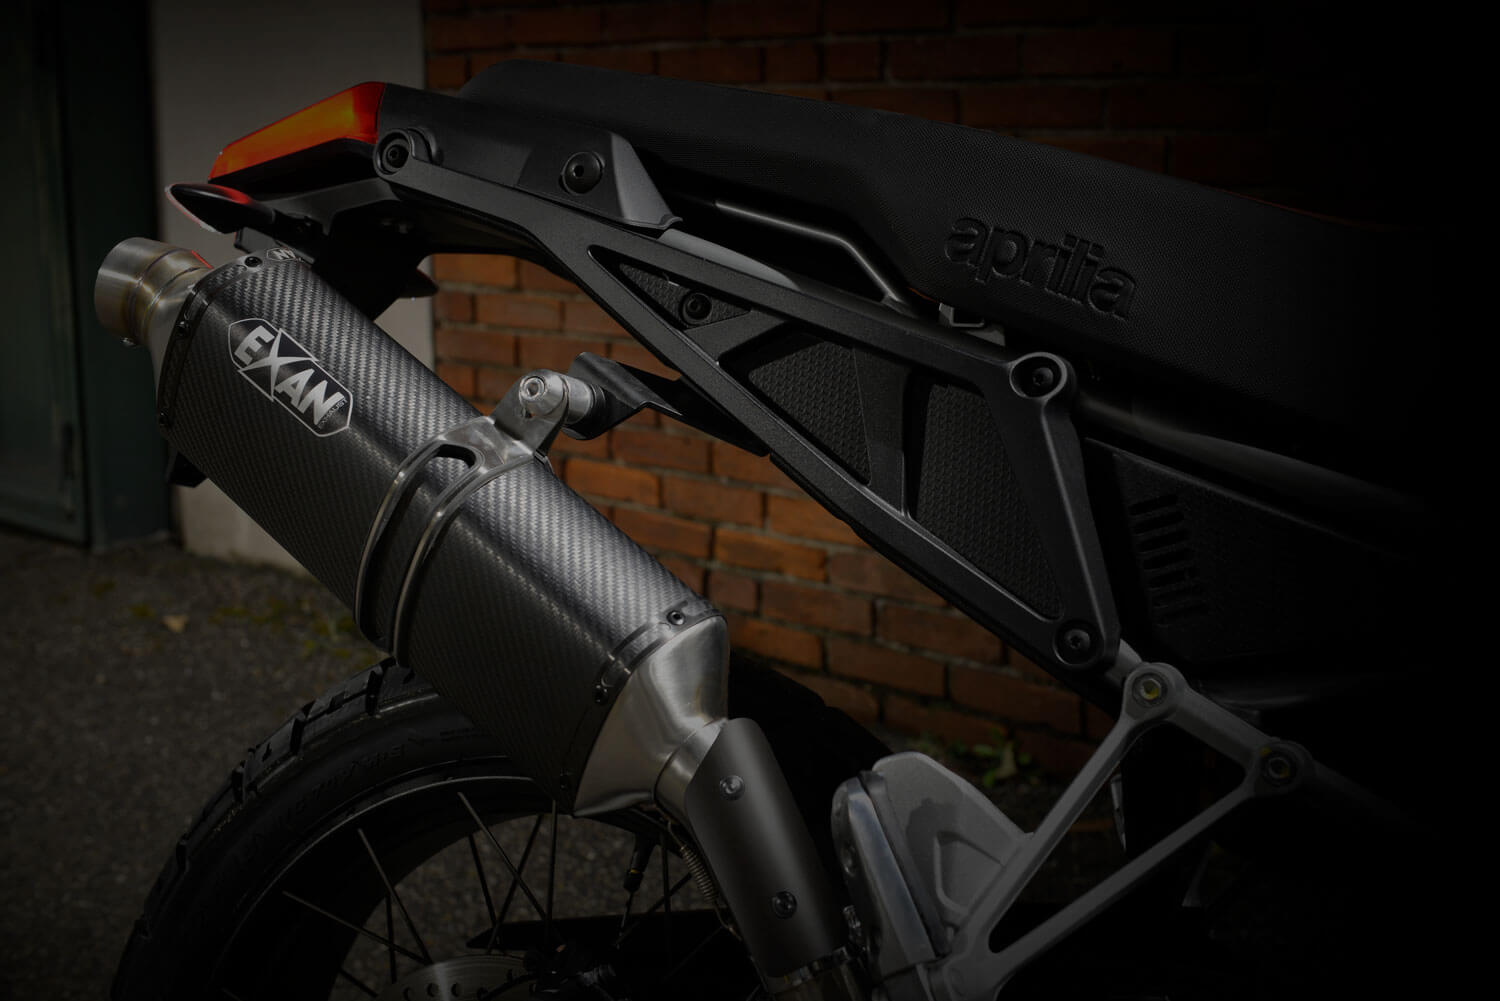 Silencer for Aprilia Tuareg 660 - A2 (2022) EURO 5 approved for use on the road, X-RALLY model